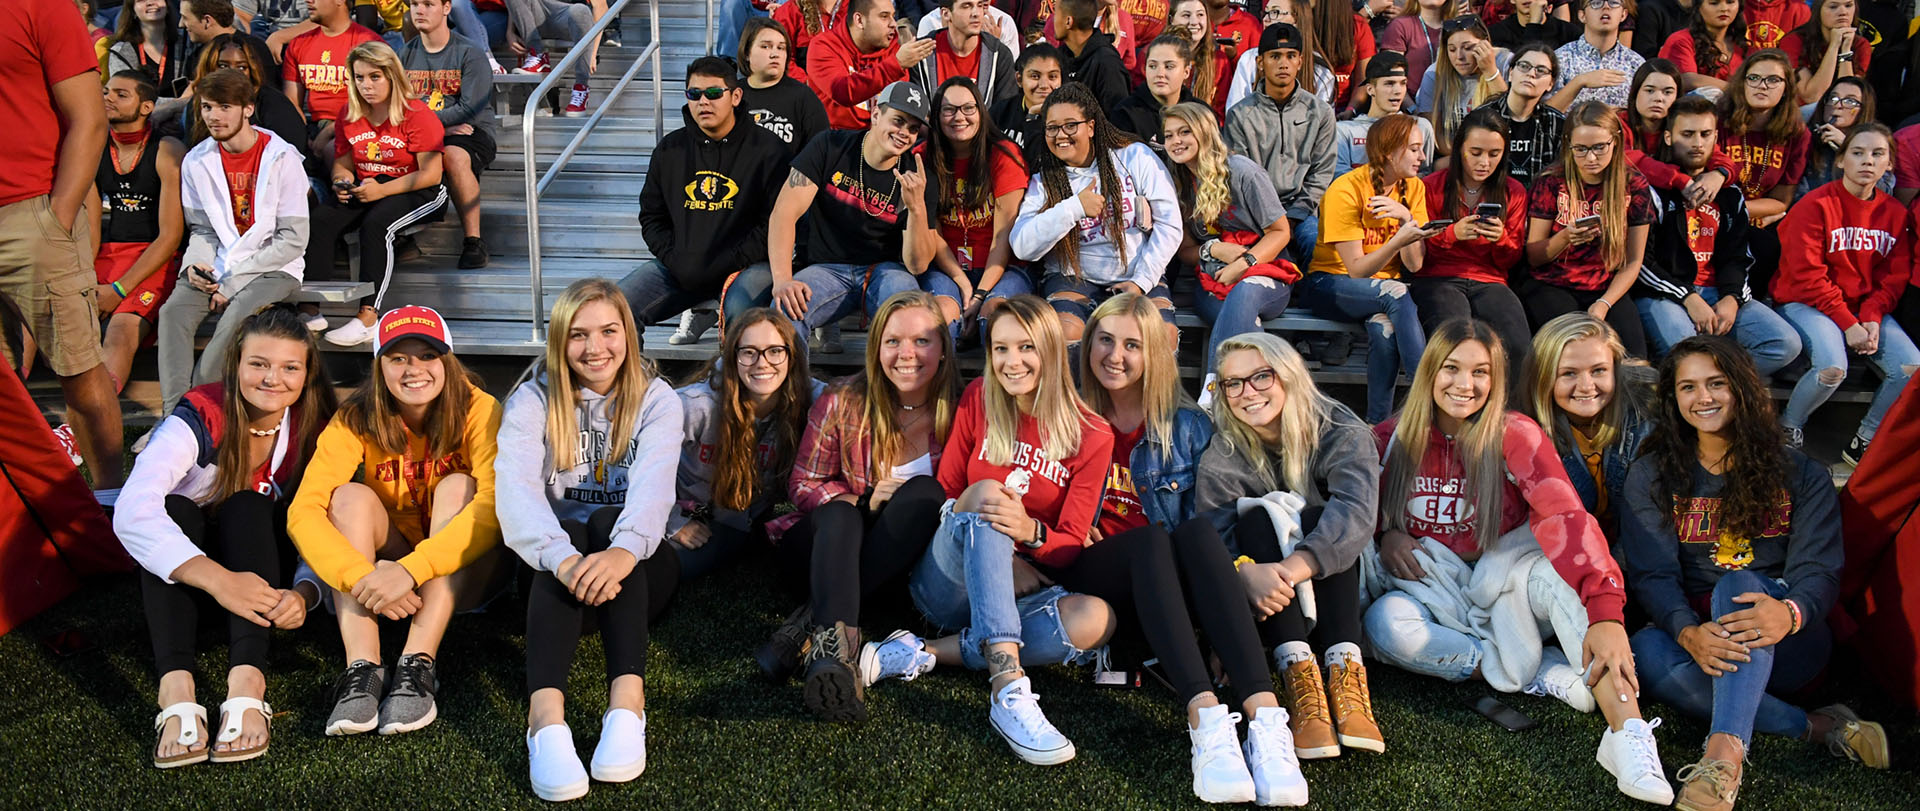 Ferris State students at a football game.